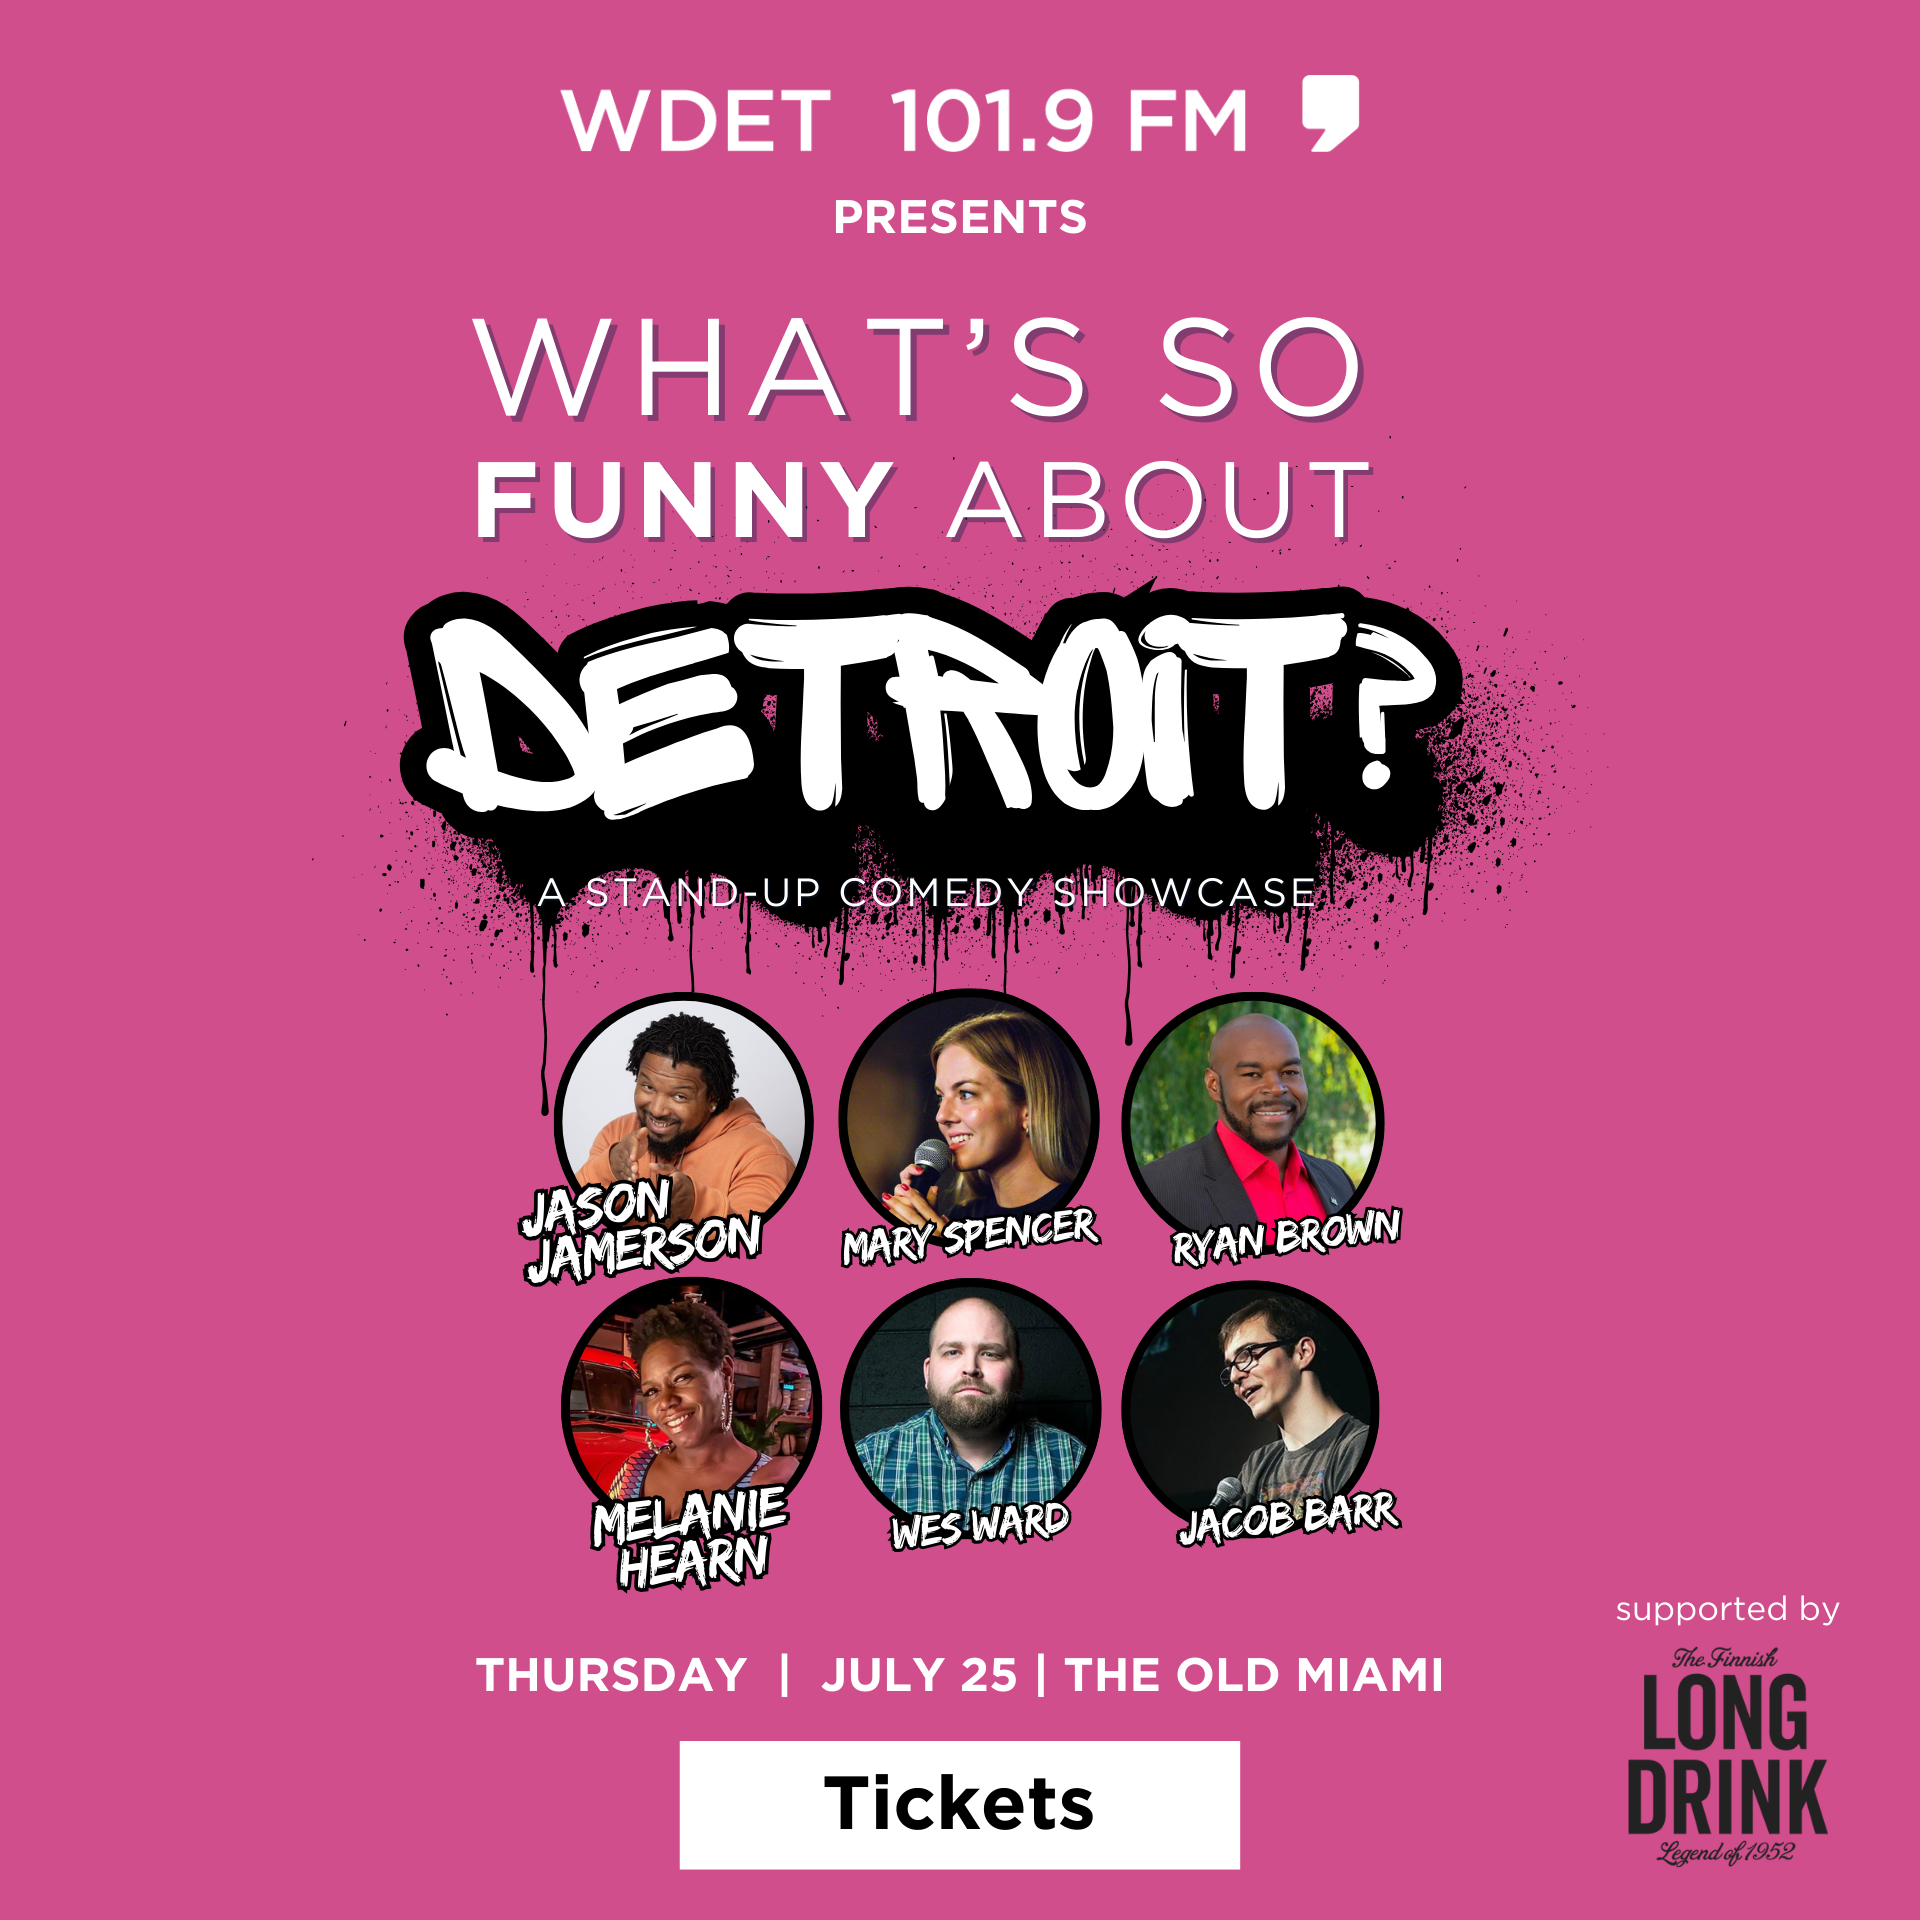 WDET presents What's So Funny About Detroit on July 25 at The Old Miami.